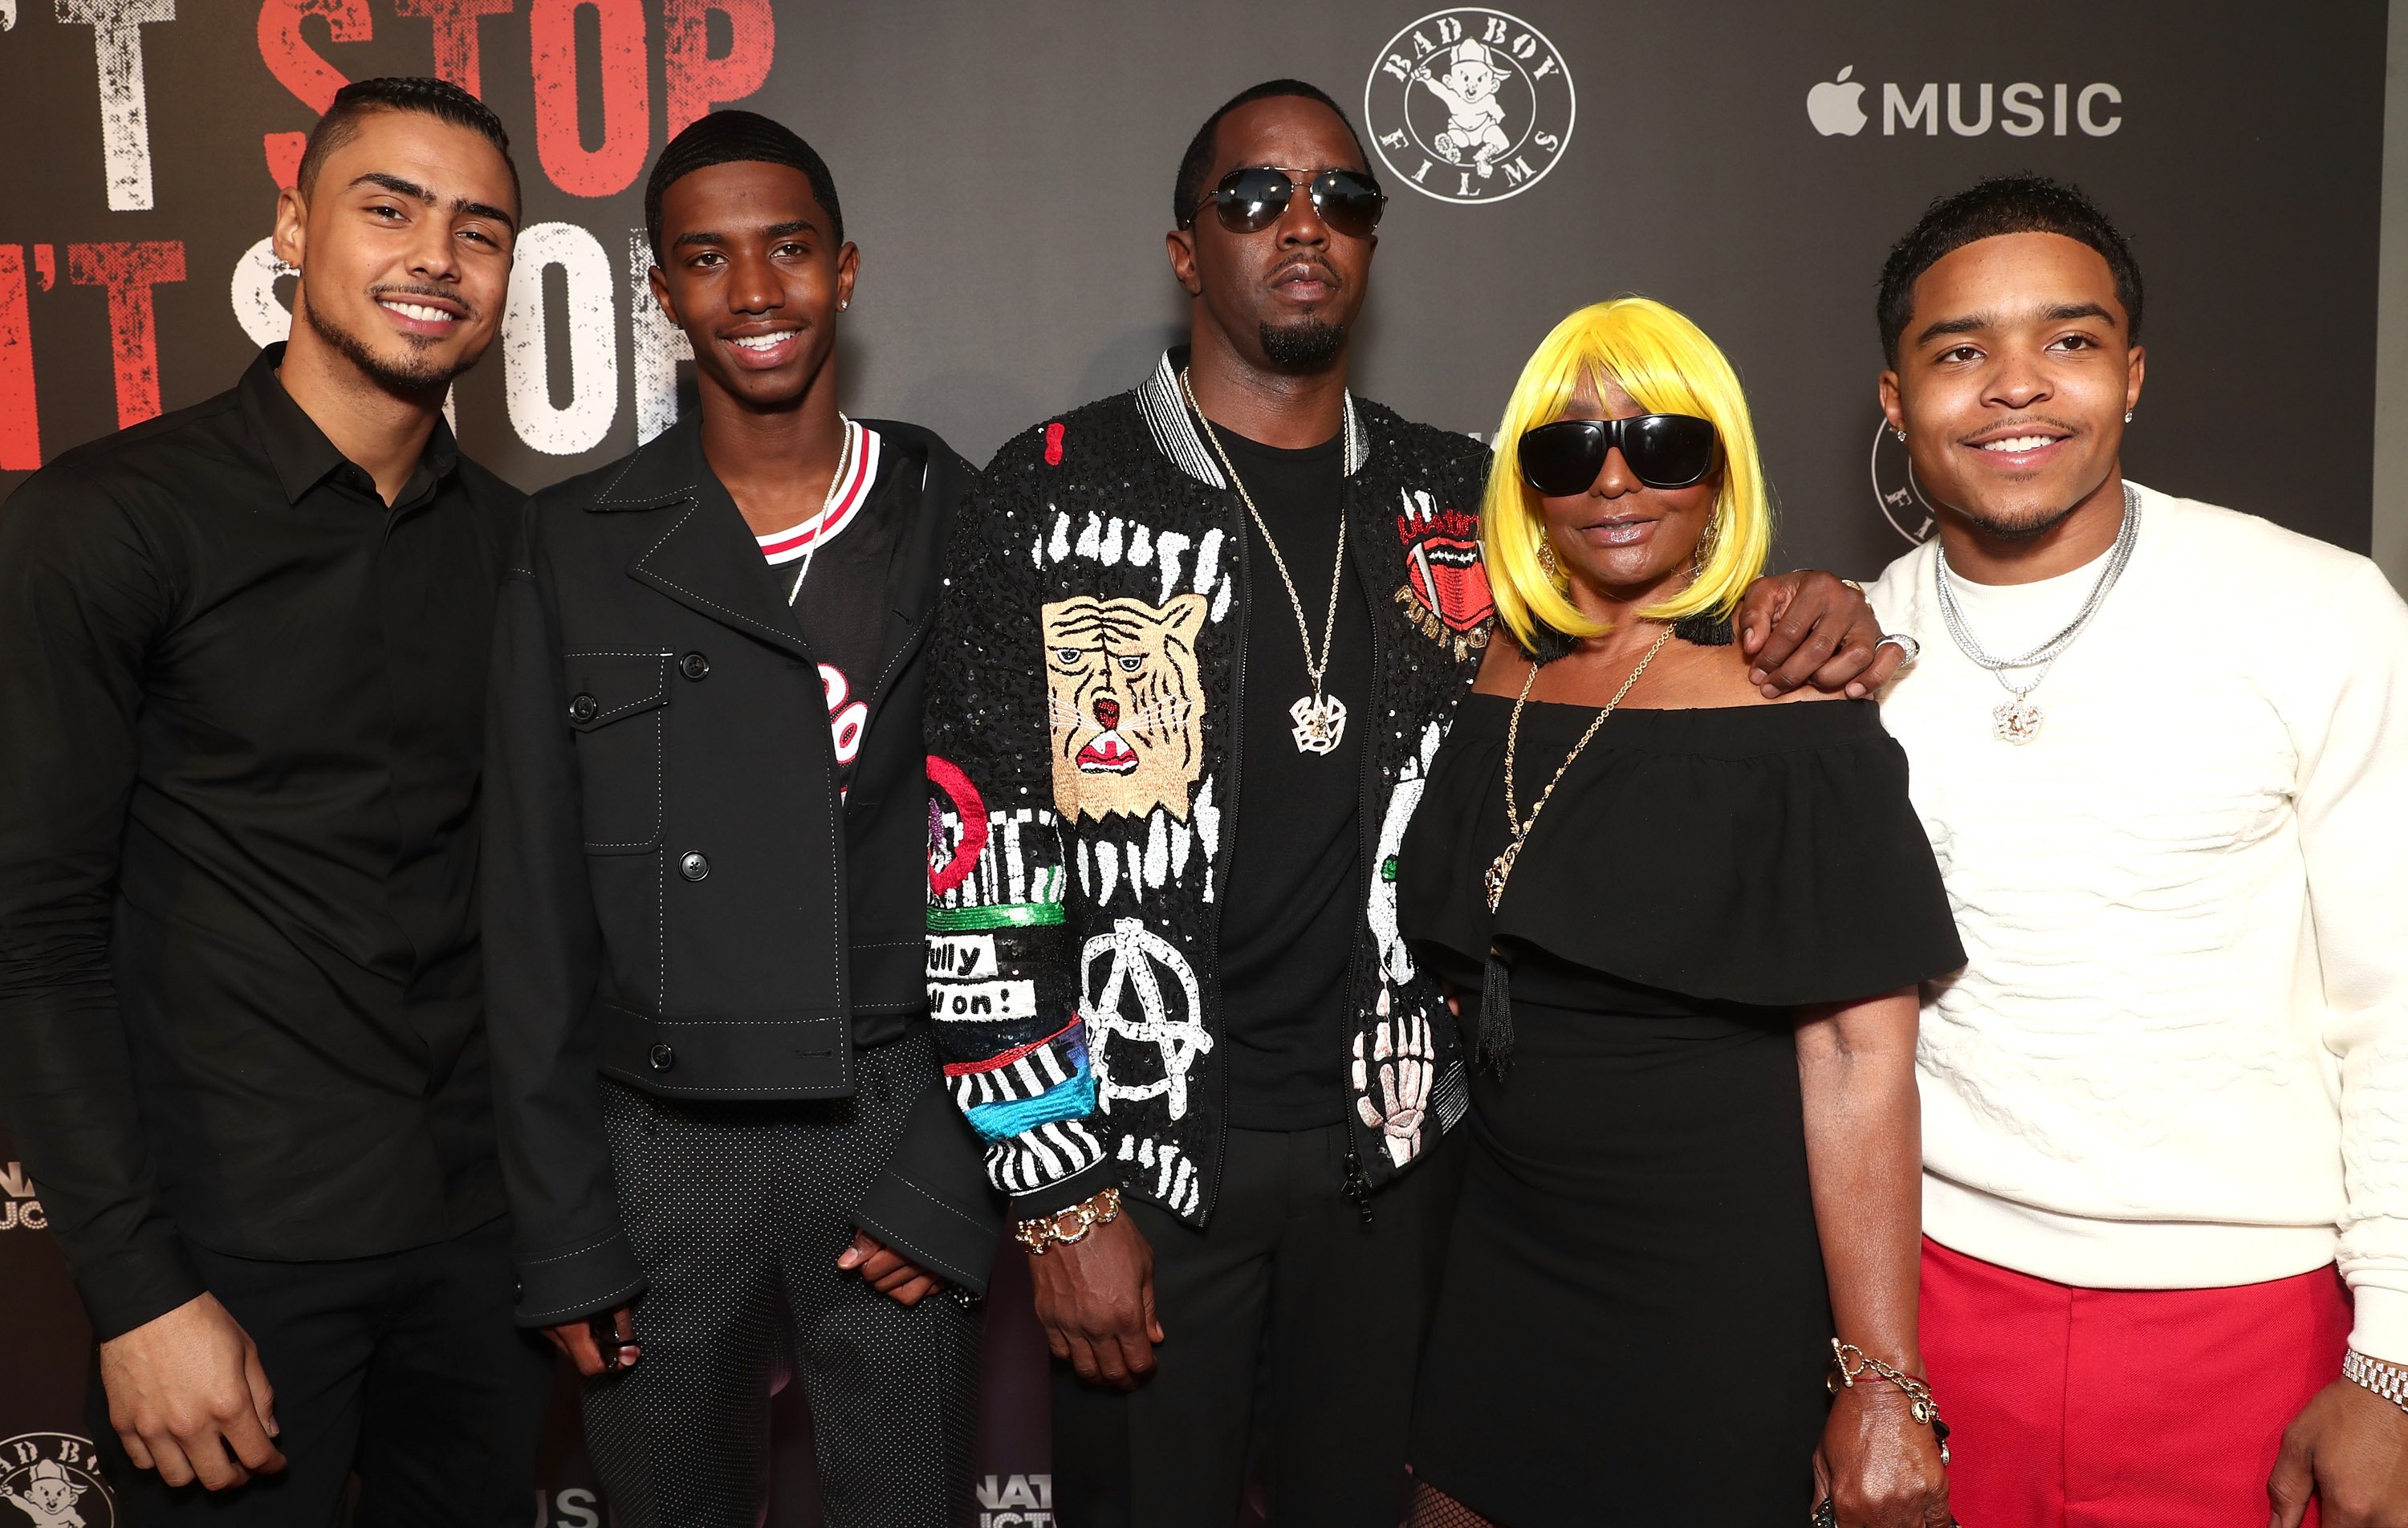 (L-R)Quincy Brown, Christian Combs, Sean "Diddy" Combs, Janice Combs & Justin Combs at the Premiere of "Can't Stop Won't Stop" on June 21, 2017 in California | Photo: Getty Images